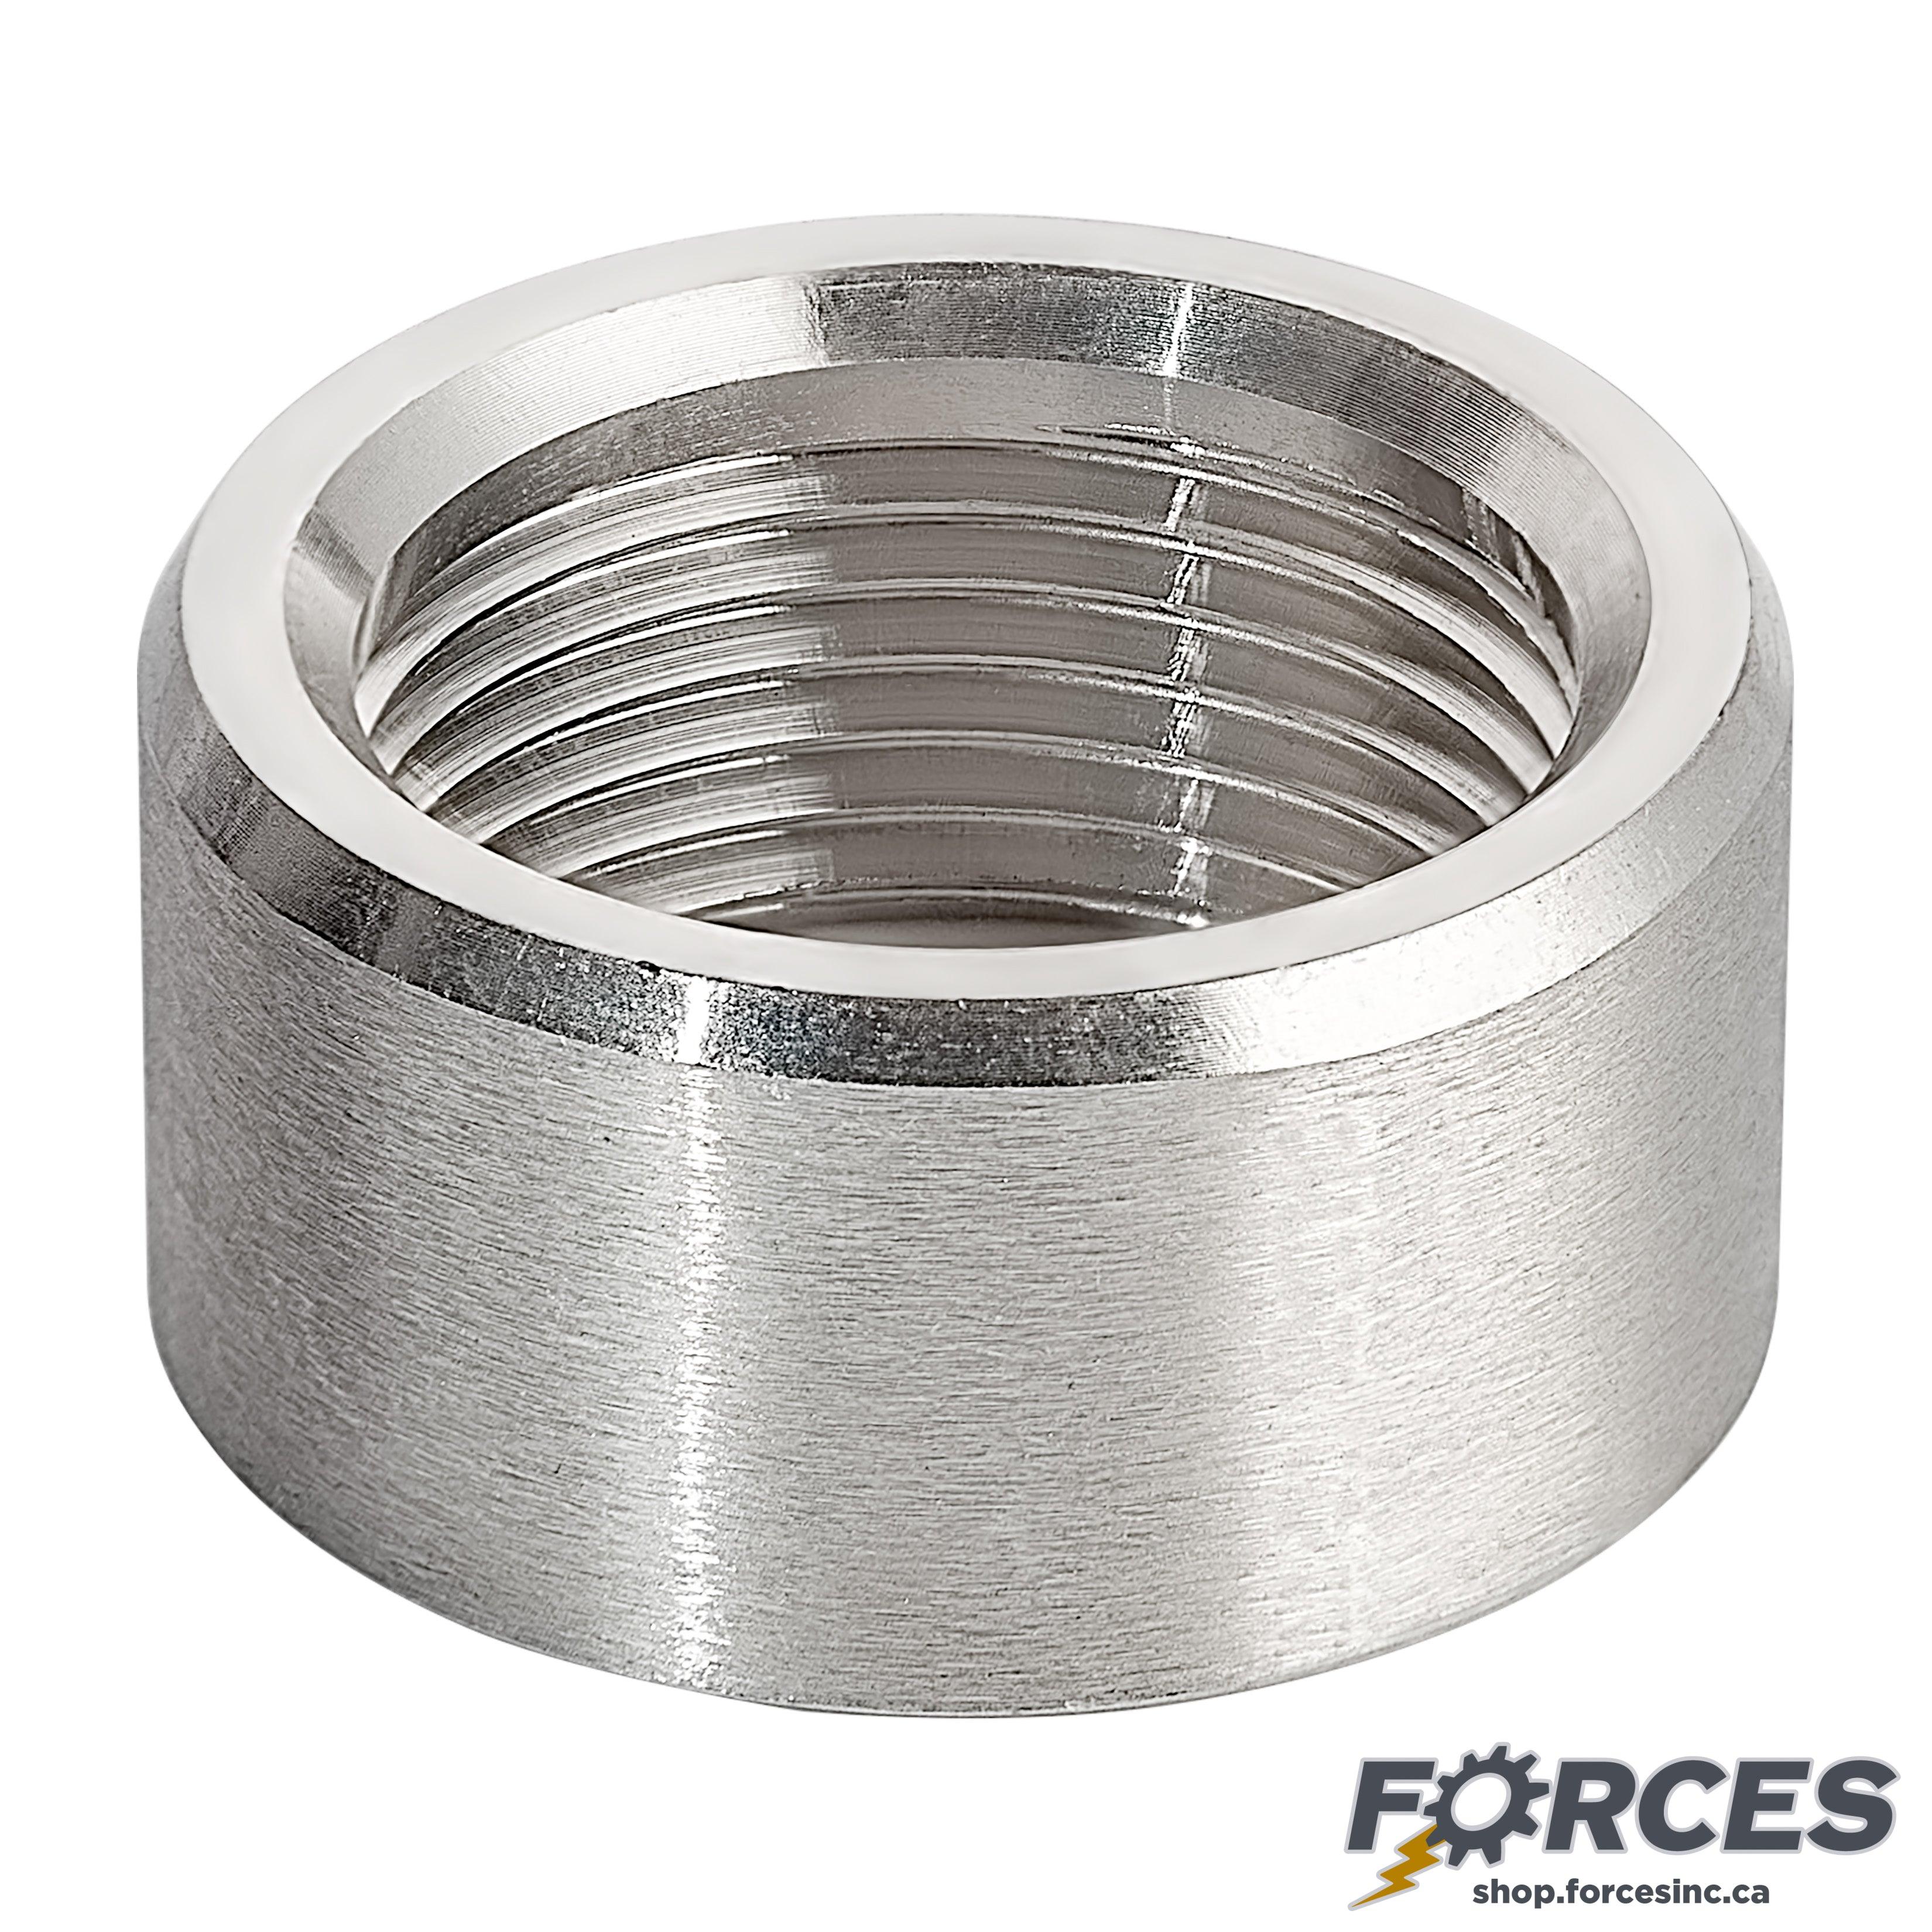 3/8" Half-Coupling NPT #150 - Stainless Steel 304 - Forces Inc